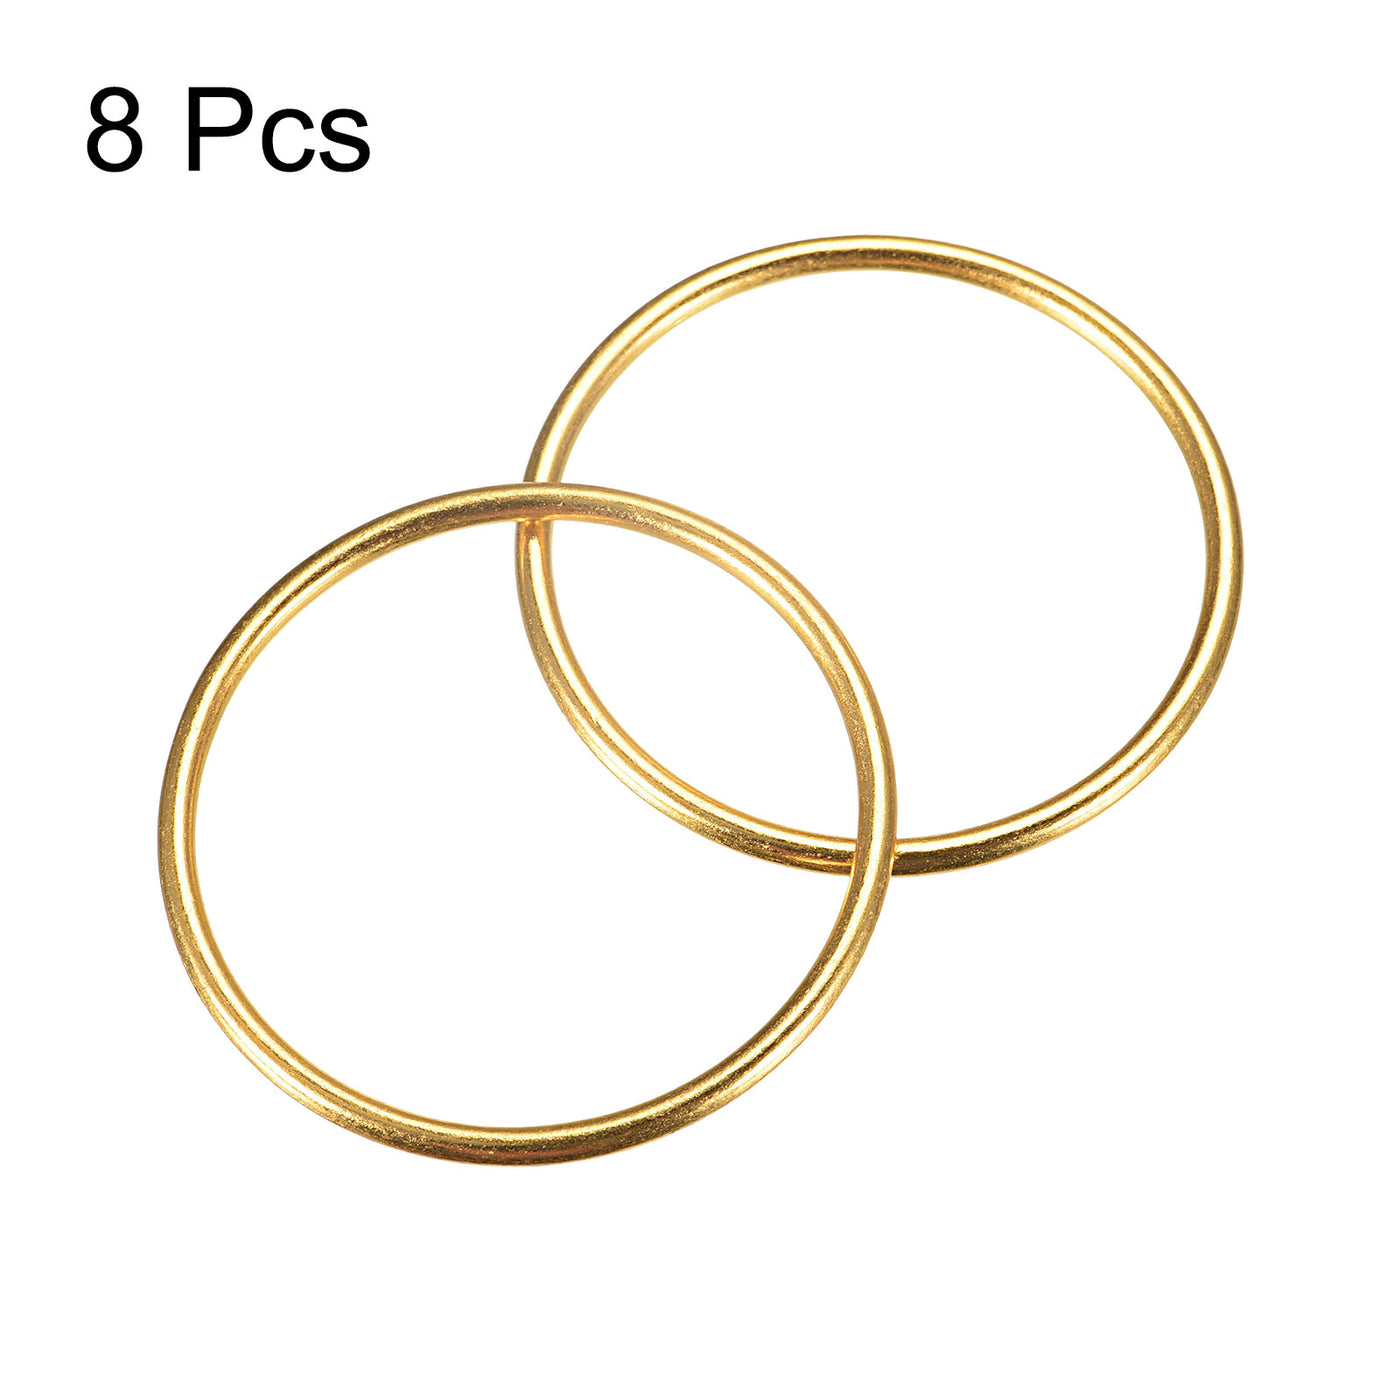 uxcell Uxcell Metal O Rings, 8pcs 50mm(1.97") ID 3mm Thick Welded O-Ringe, Gold Tone